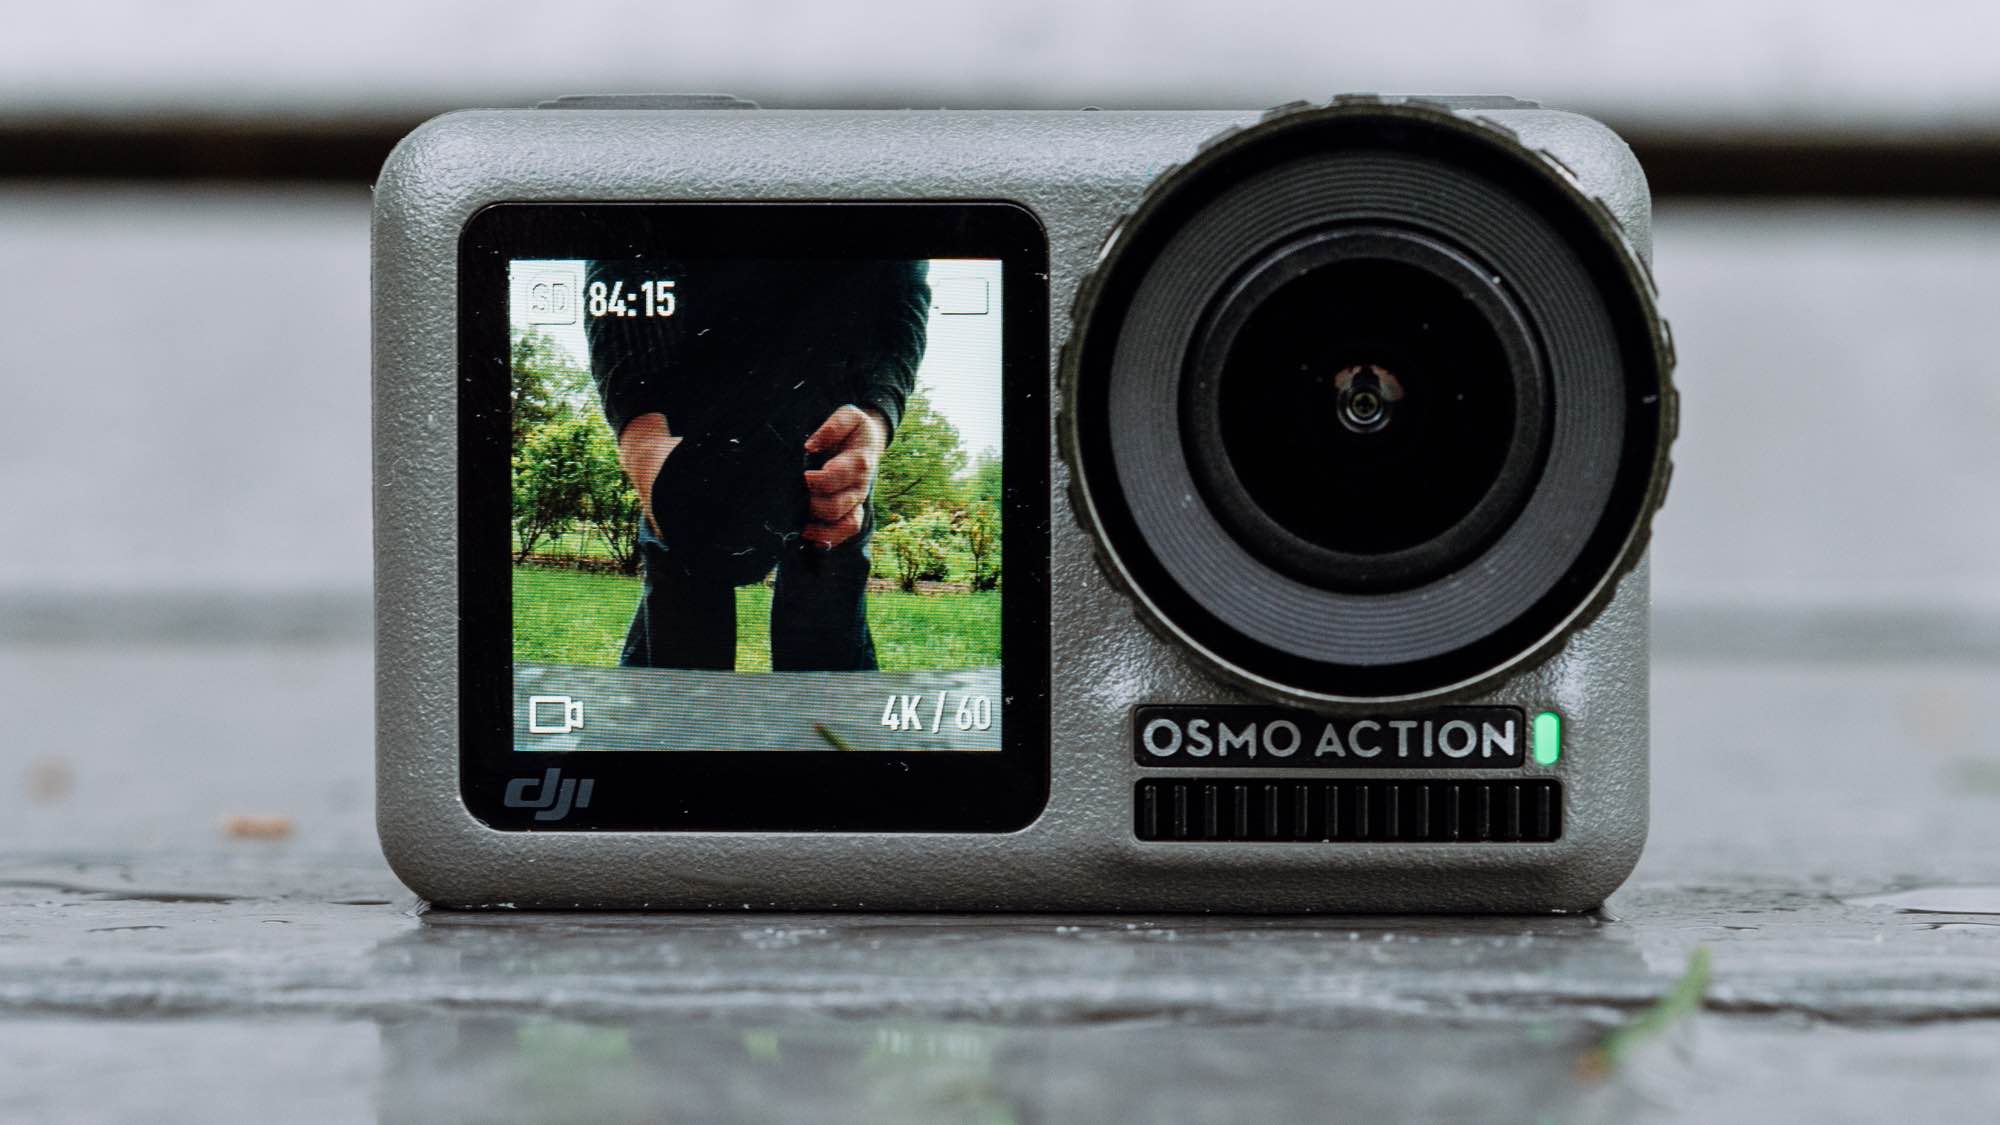 dji-osmo-action-camera-featured-2